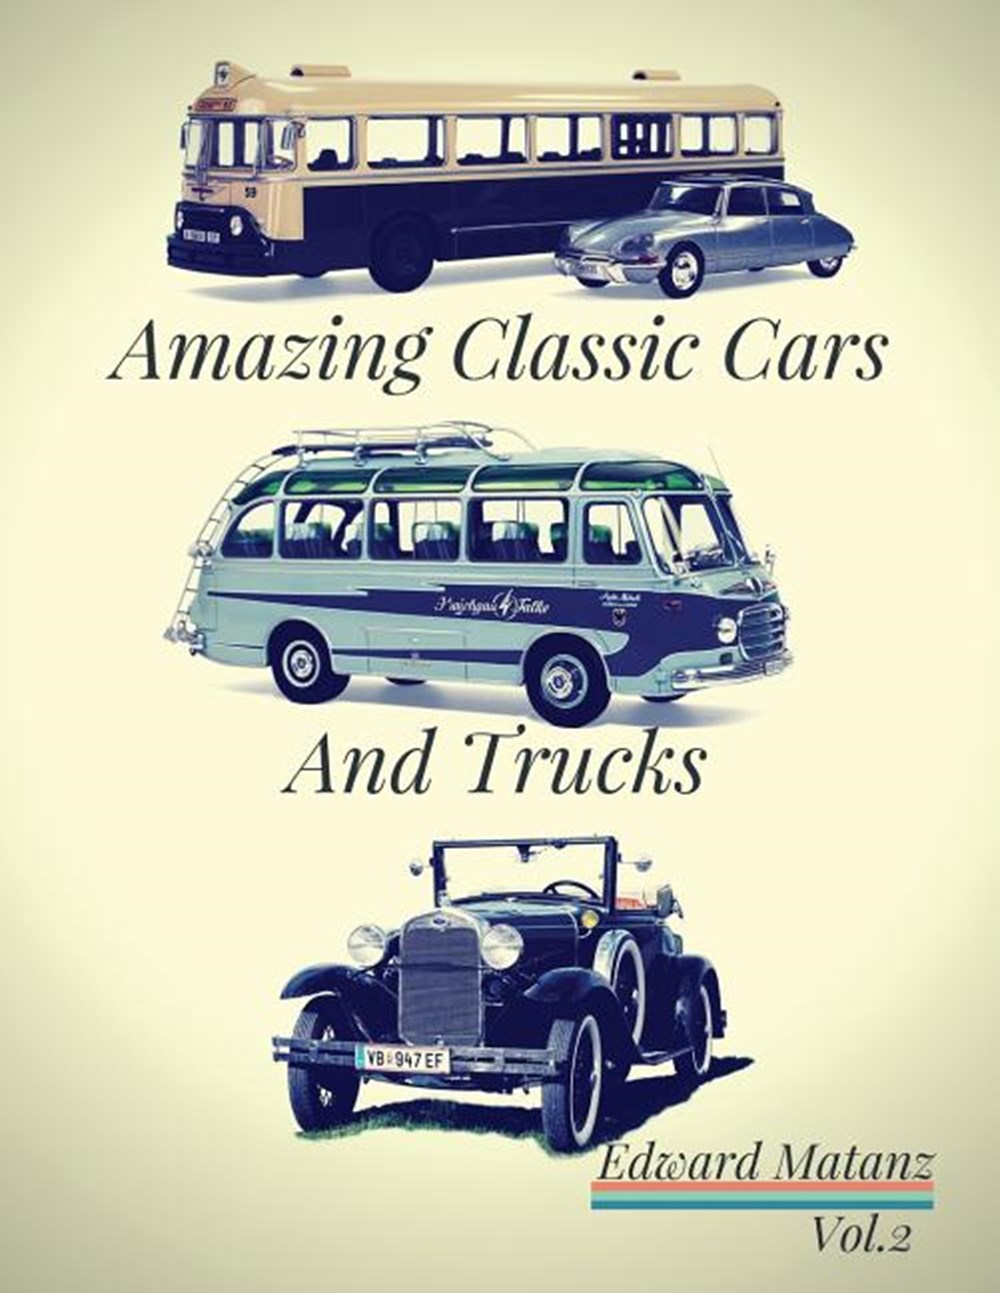 Picture Cars: Photo Book Amazing Classic Cars And Trucks: Classic Cars Decor, Classic Cars Model, Cl